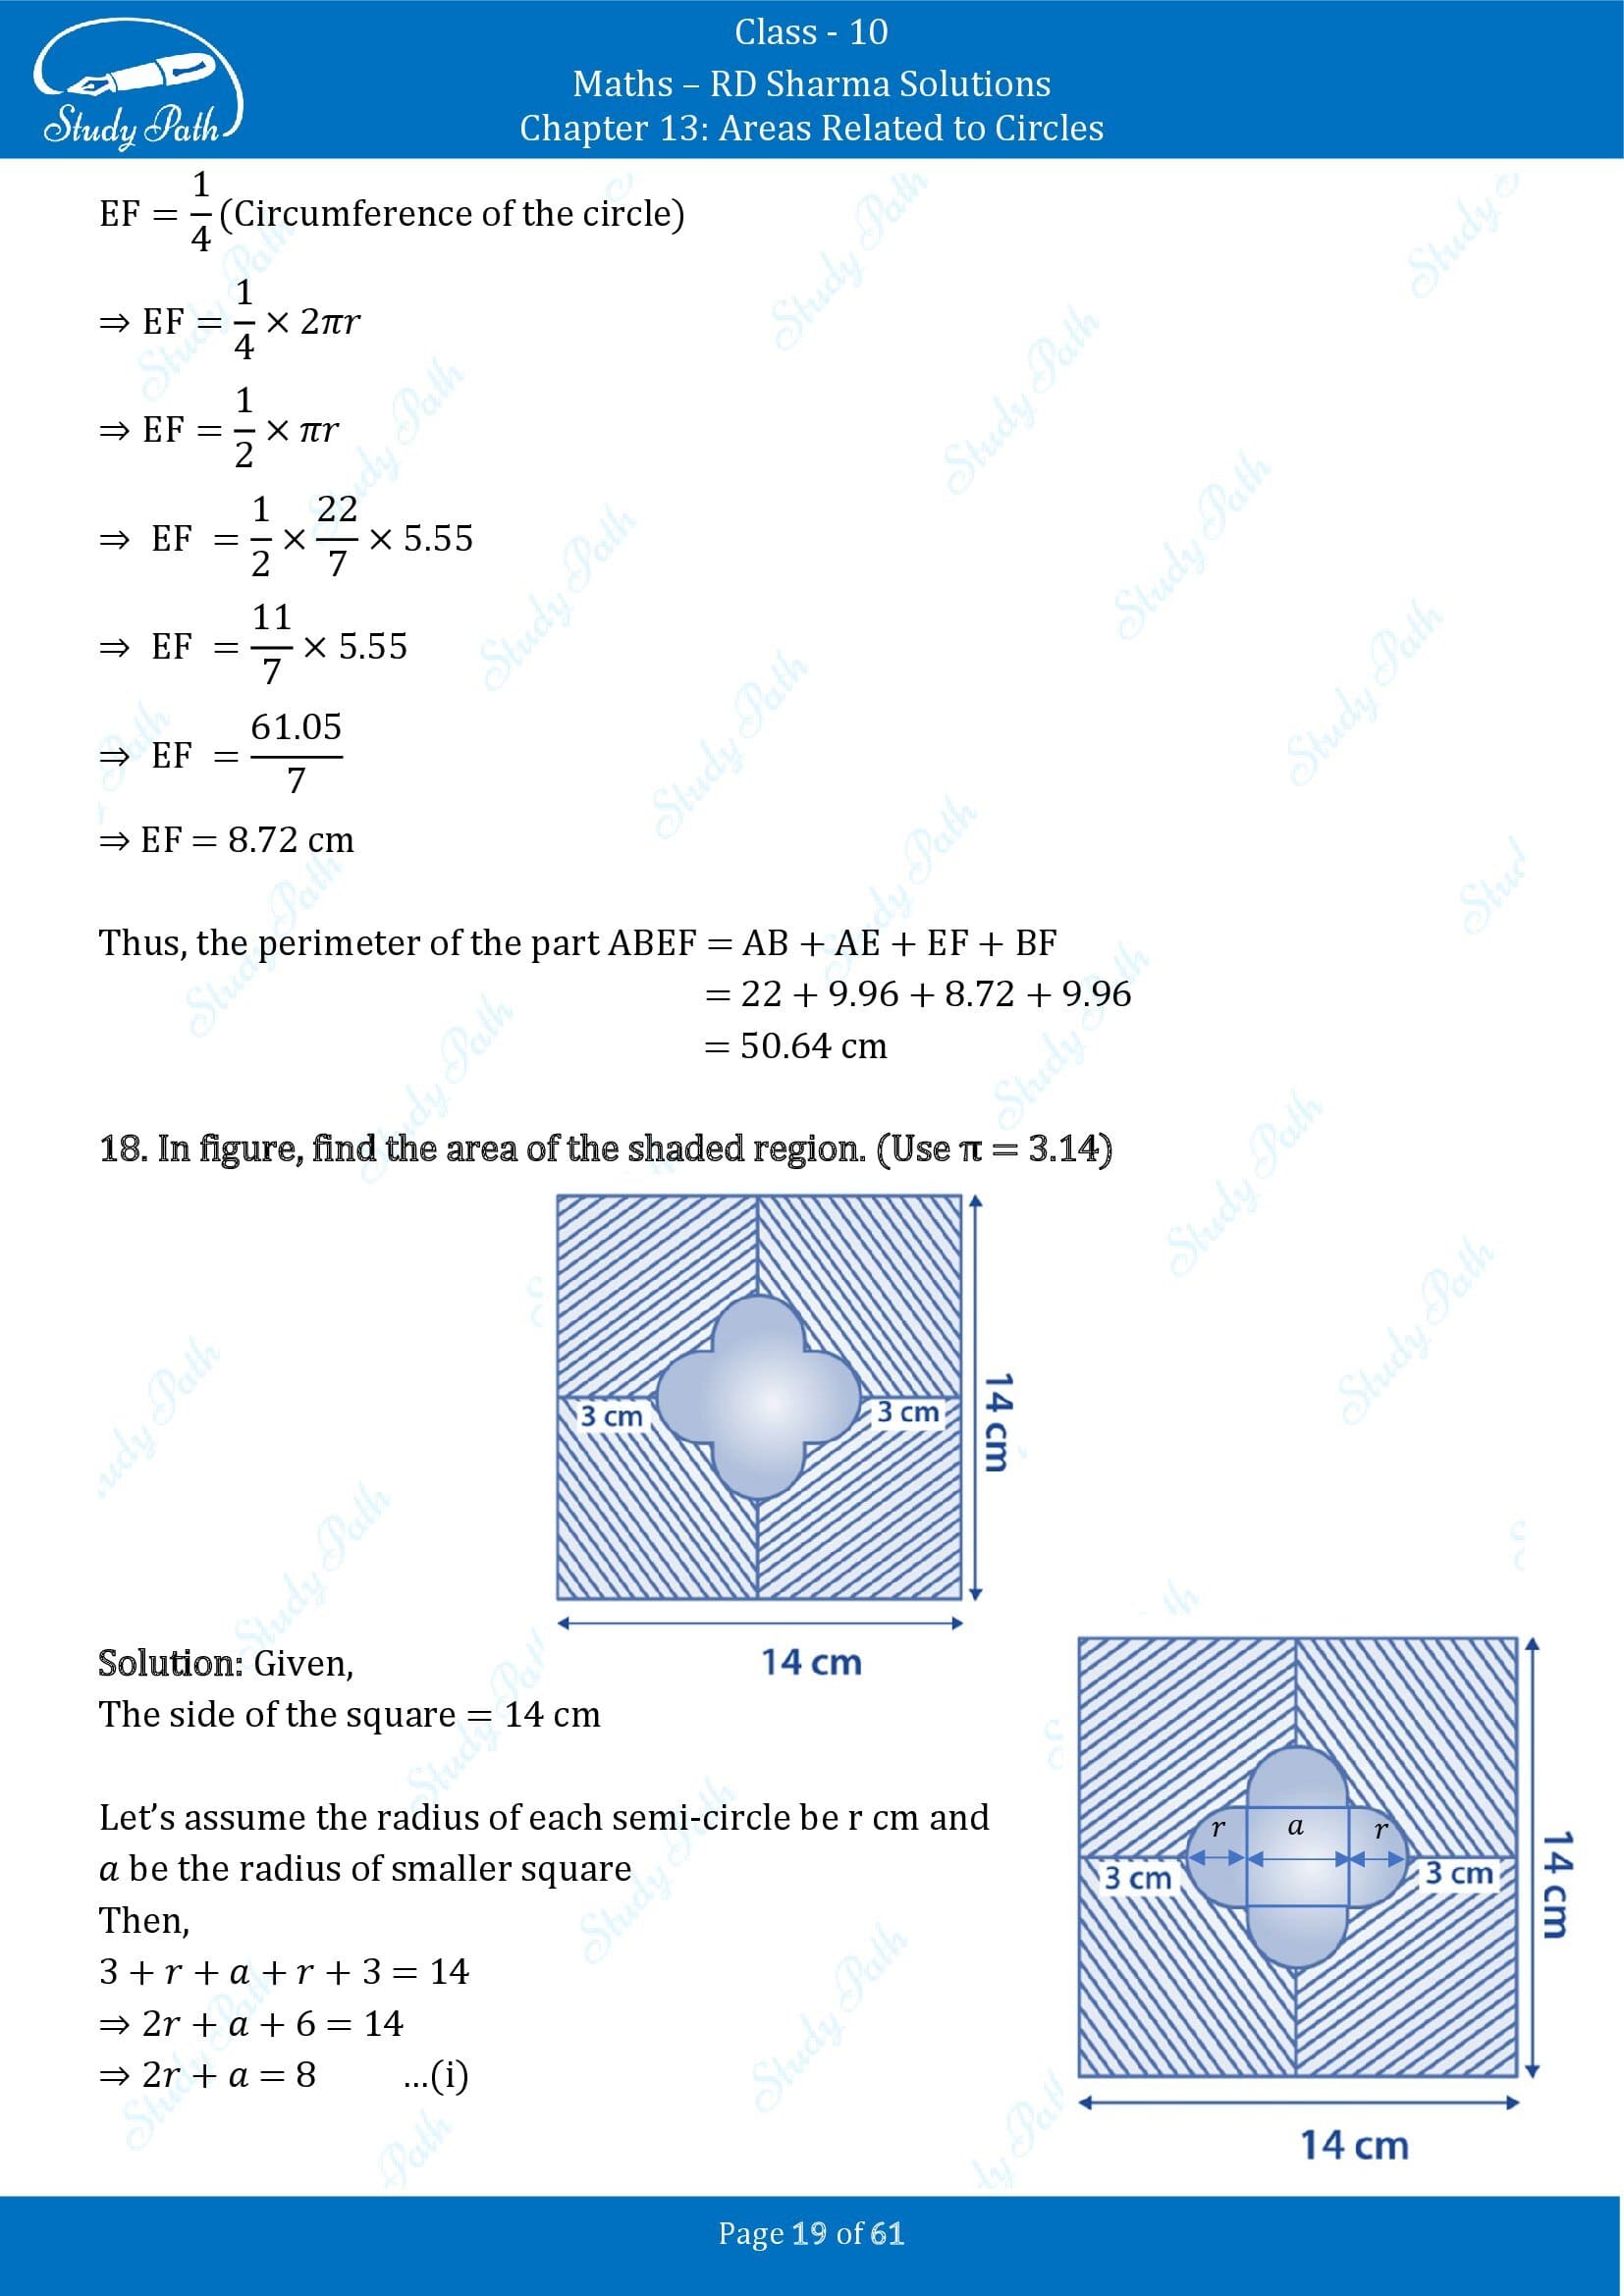 RD Sharma Solutions Class 10 Chapter 13 Areas Related to Circles Exercise 13.4 00019